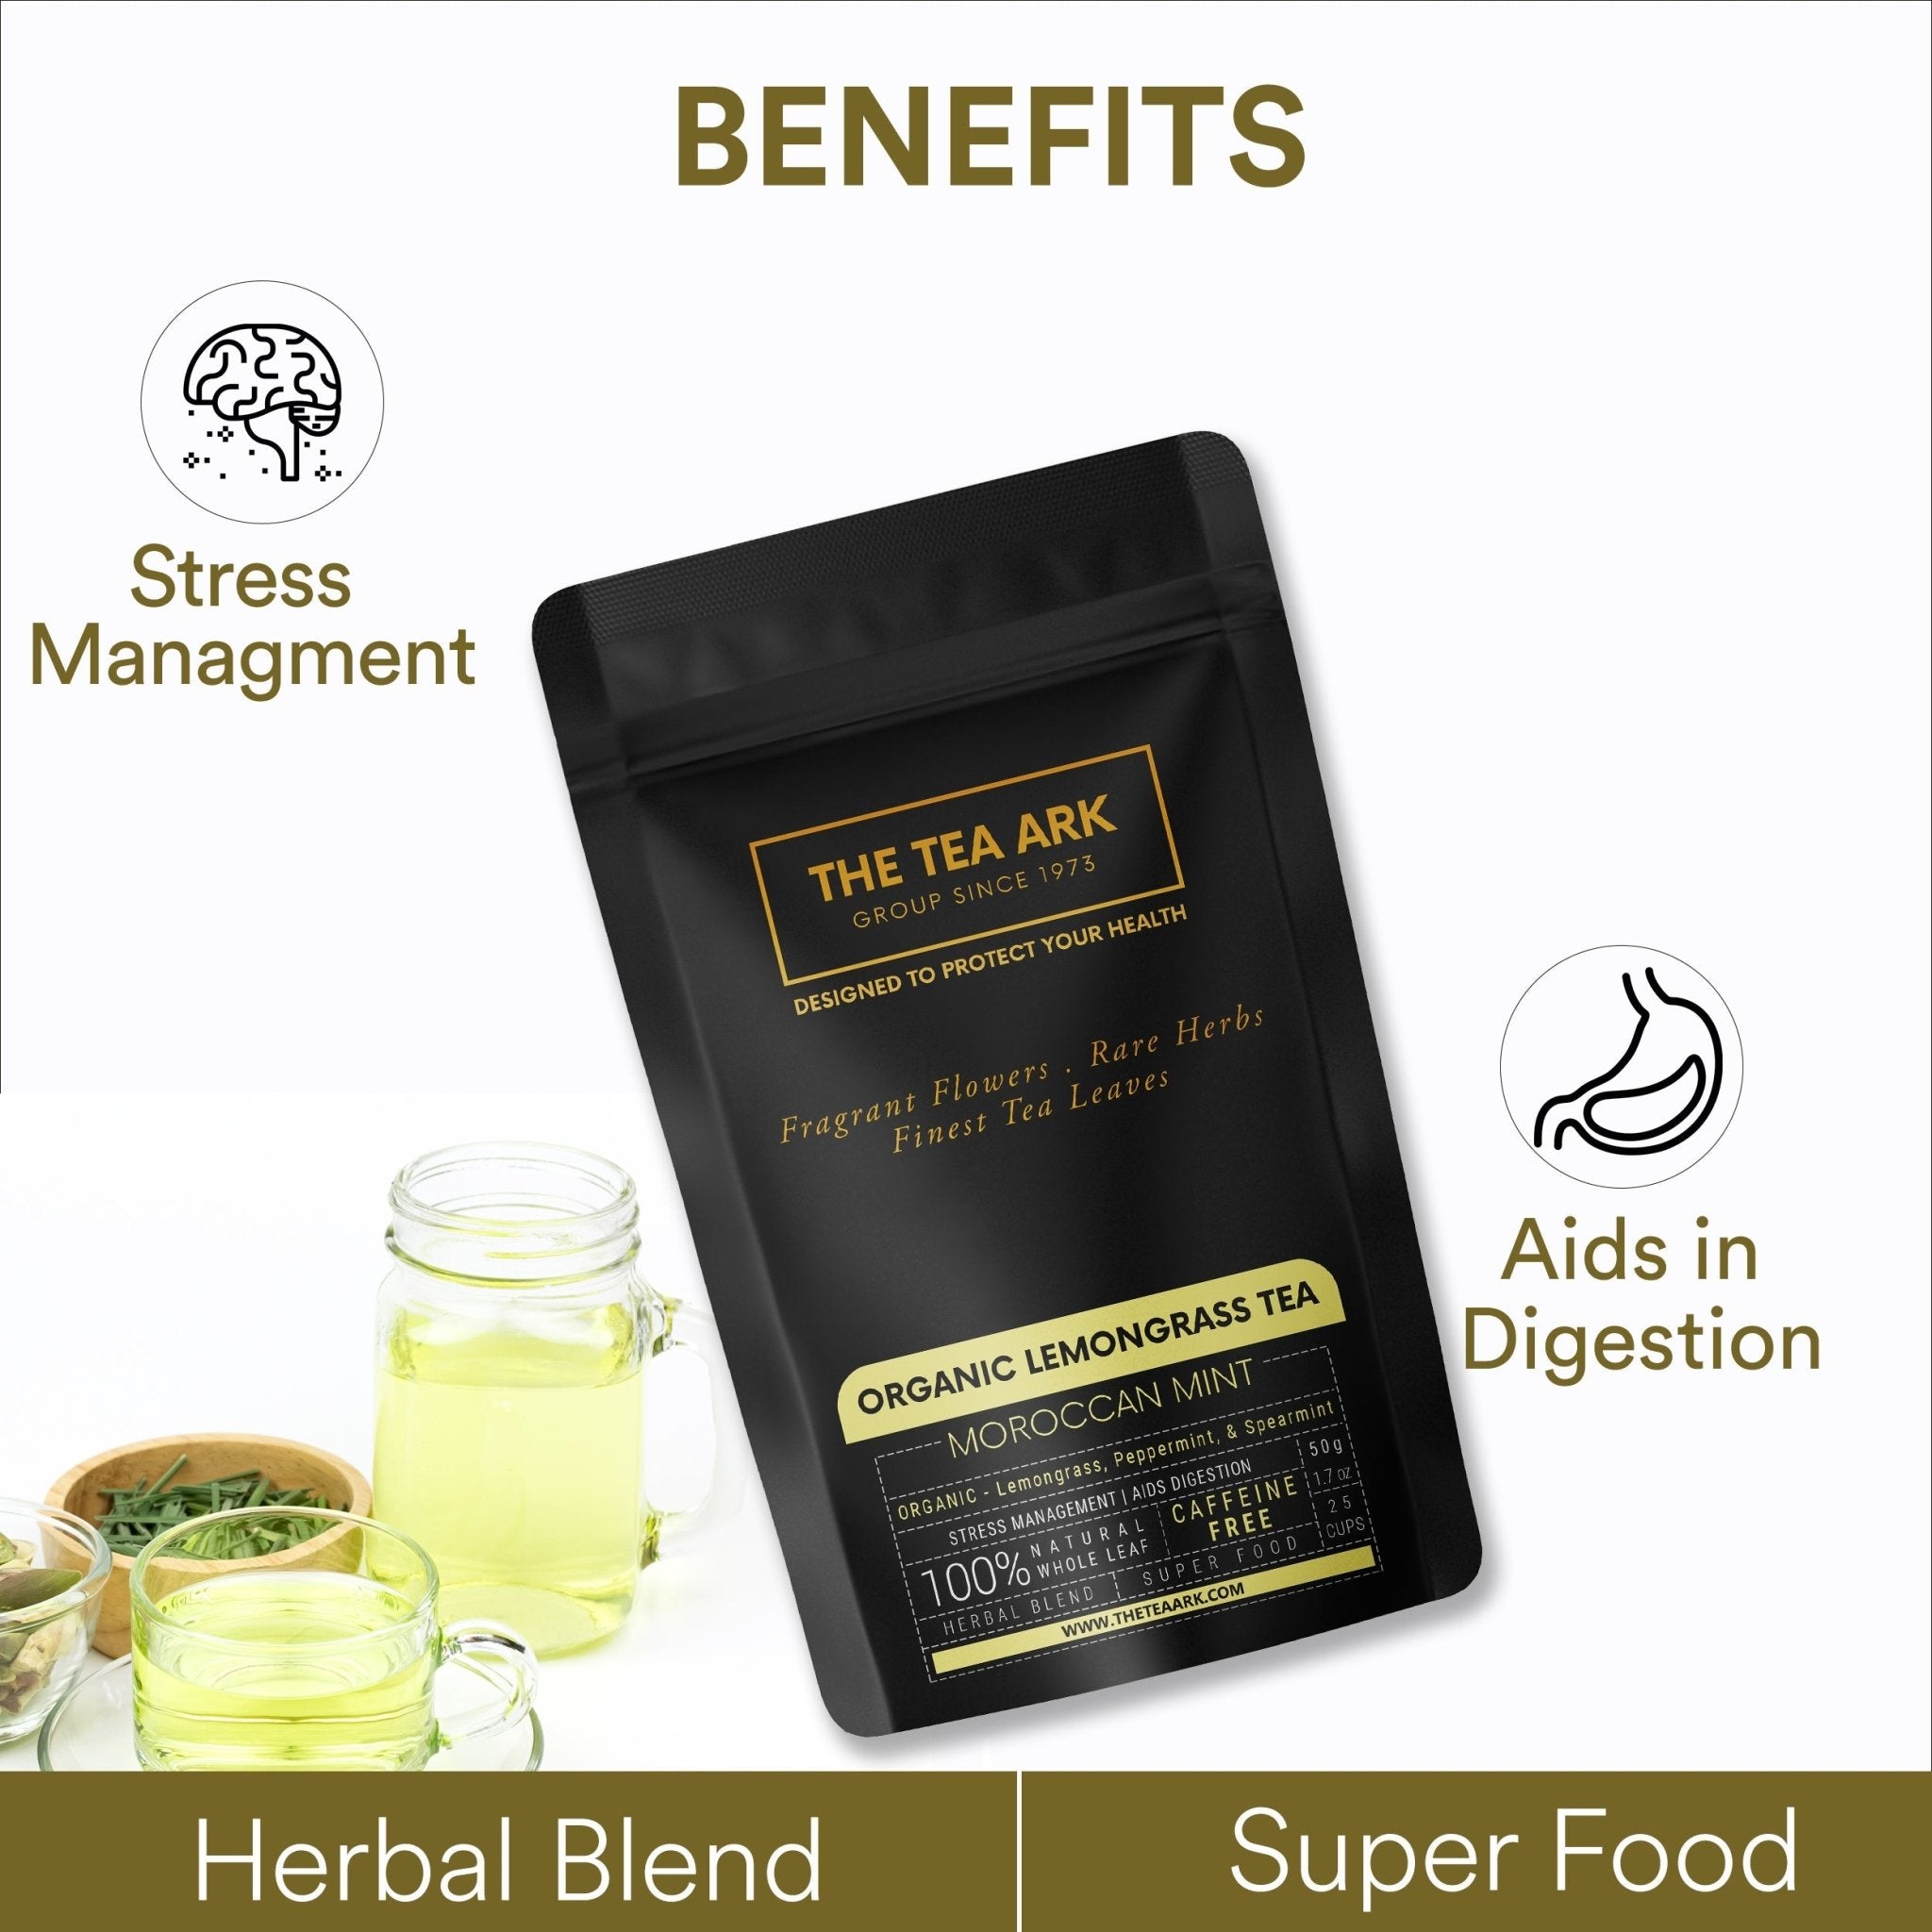 The Tea Ark Lemongrass Tea with Moroccan Mint, for Stress Relief, Daily Detox - Inlife Pharma Private Limited